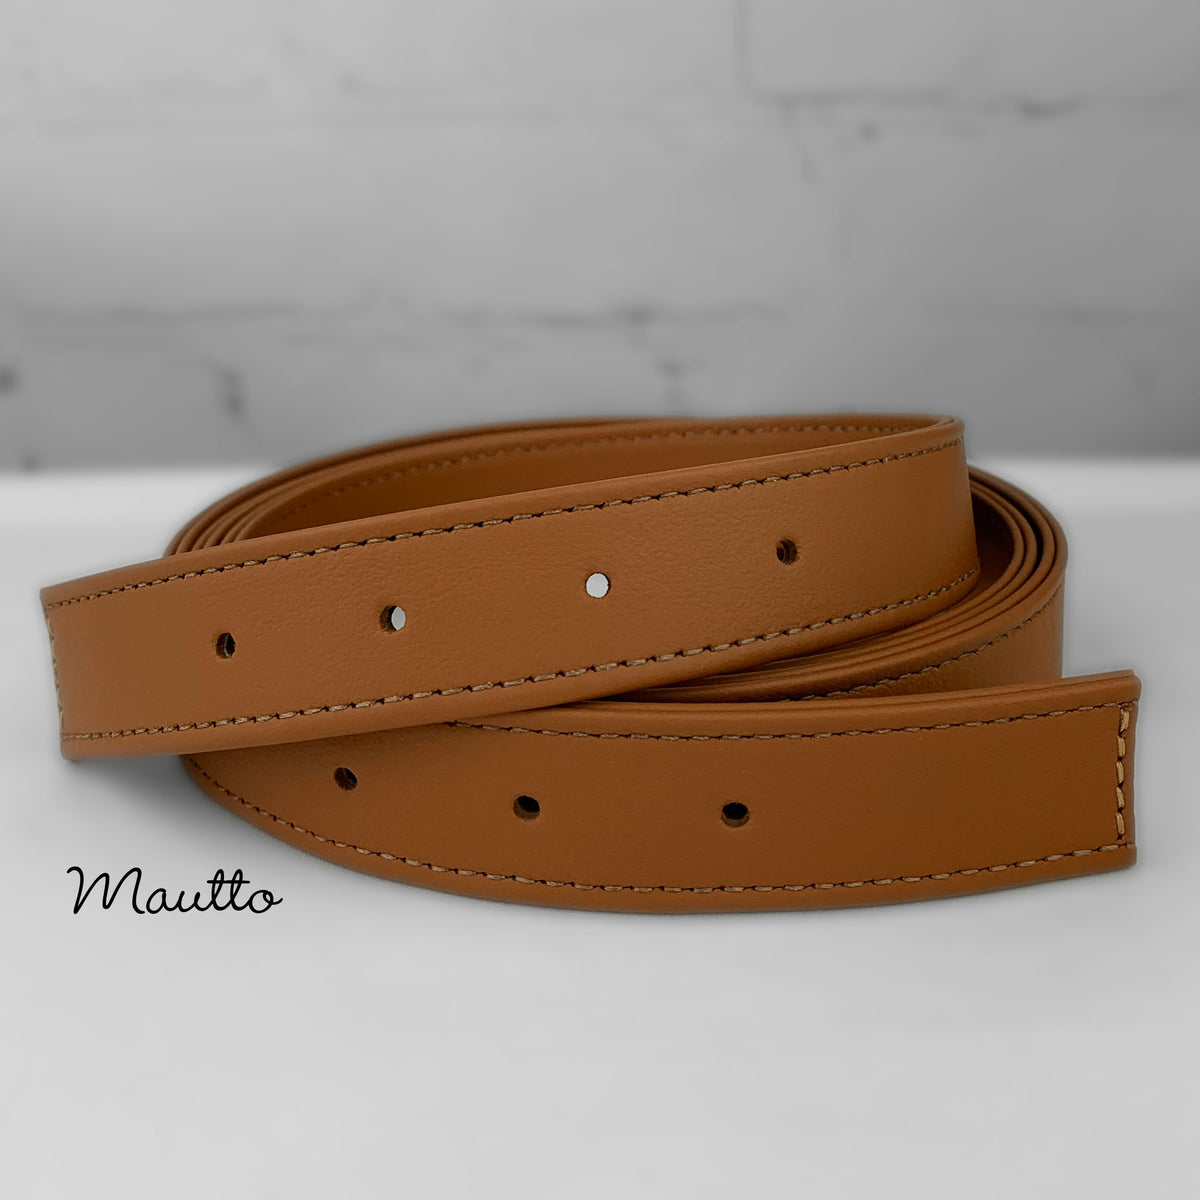 Making an Adjustable Strap with Leather Strap Ends